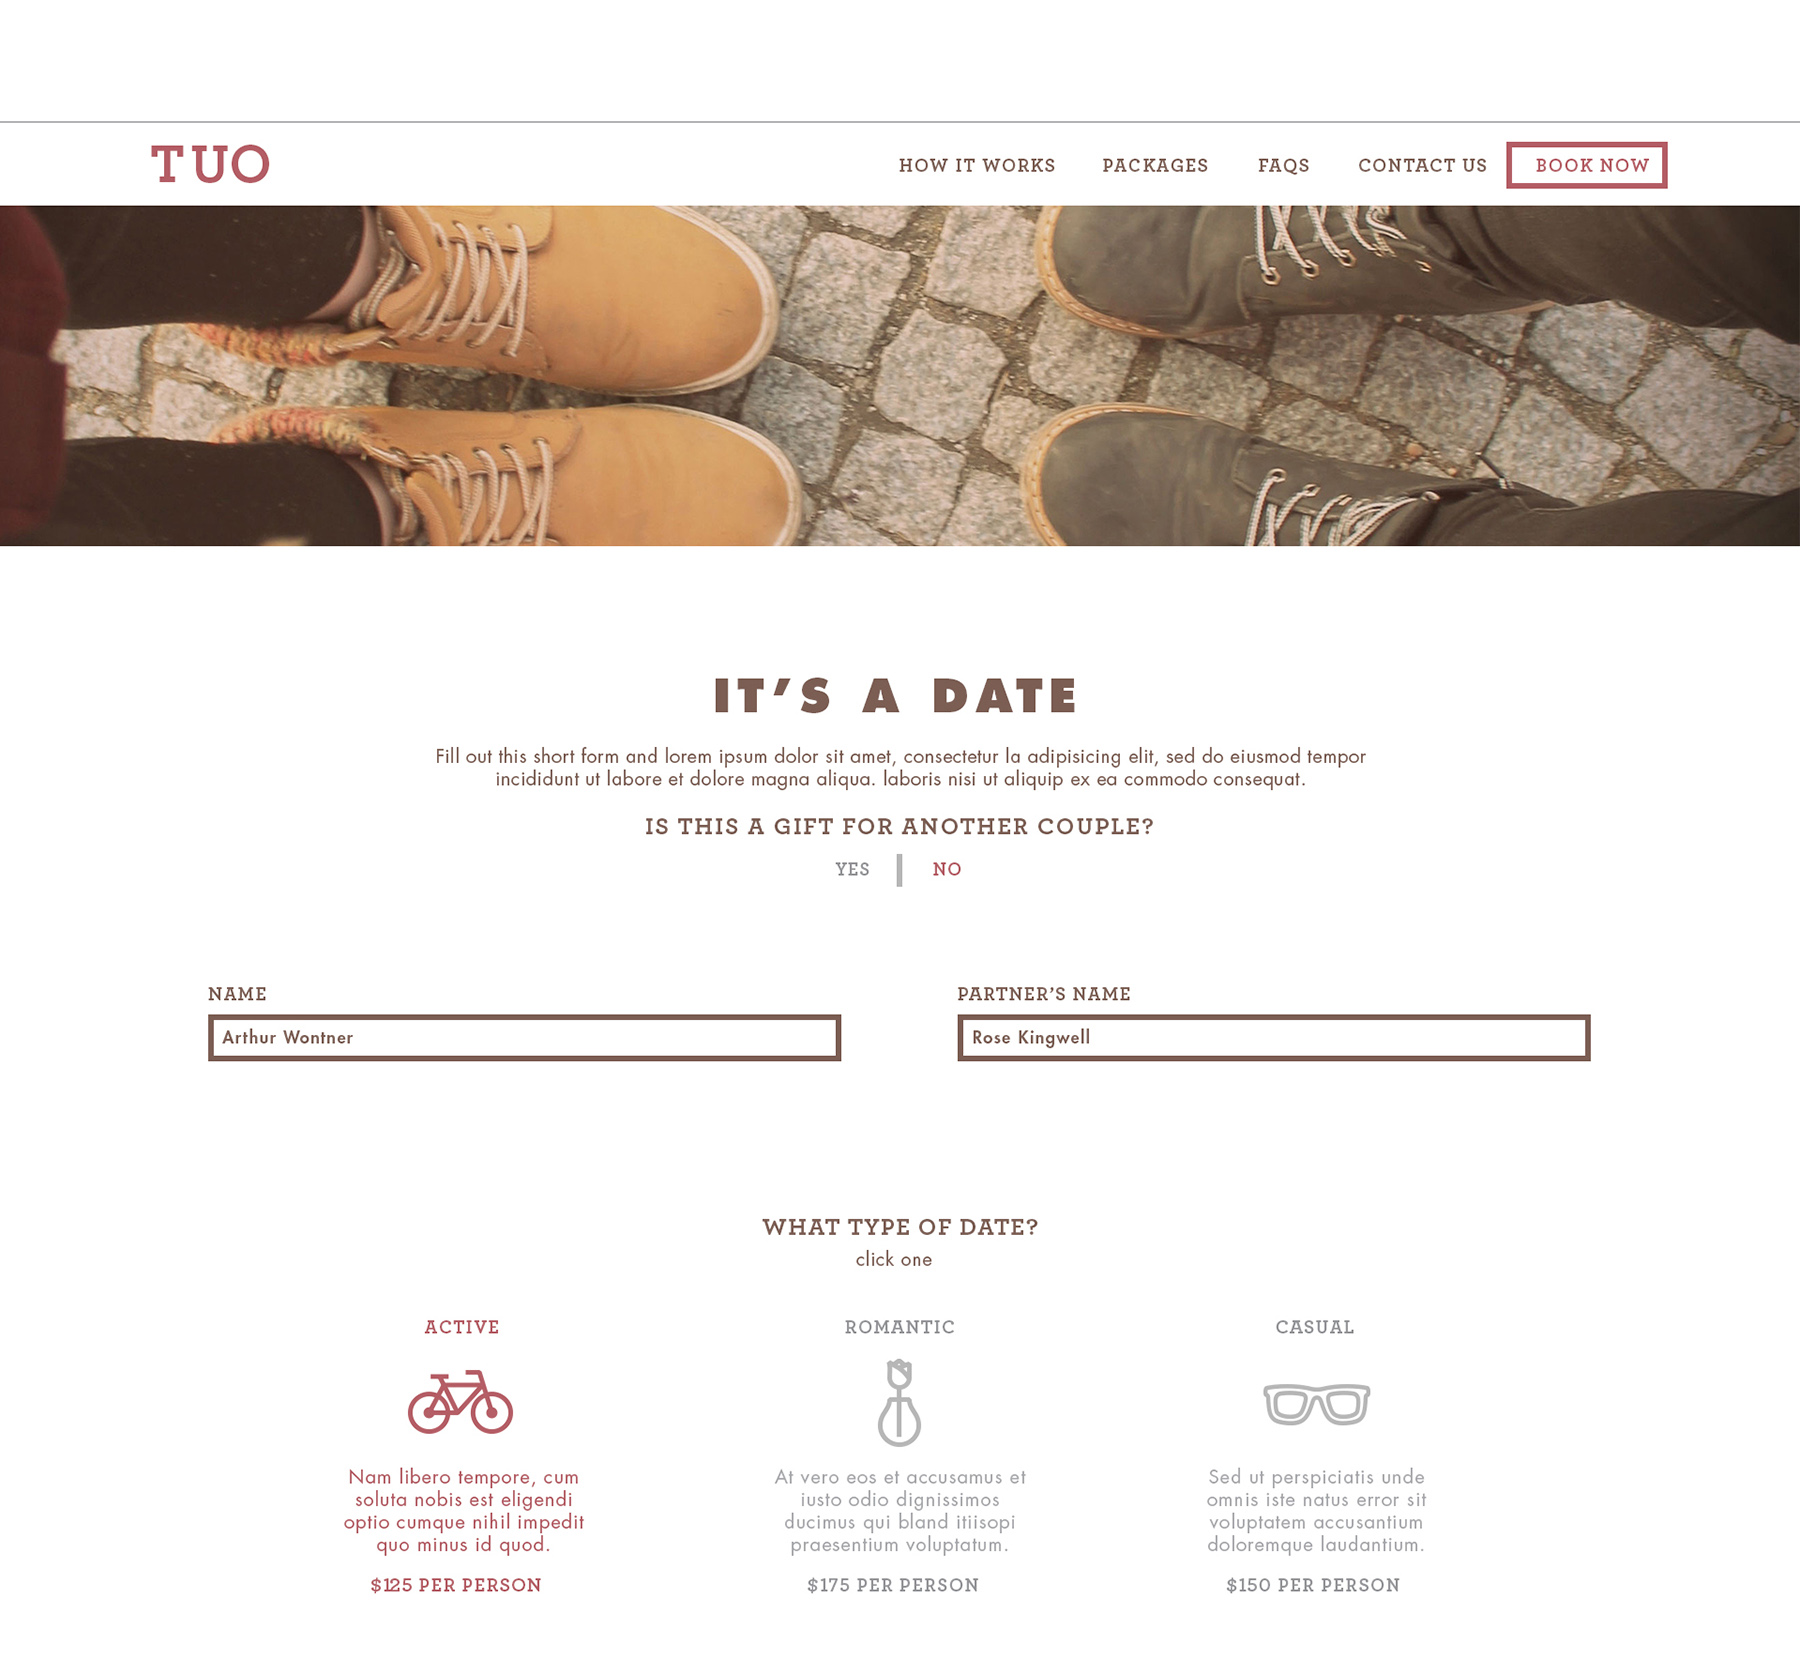 TUO_WorkSummary_10